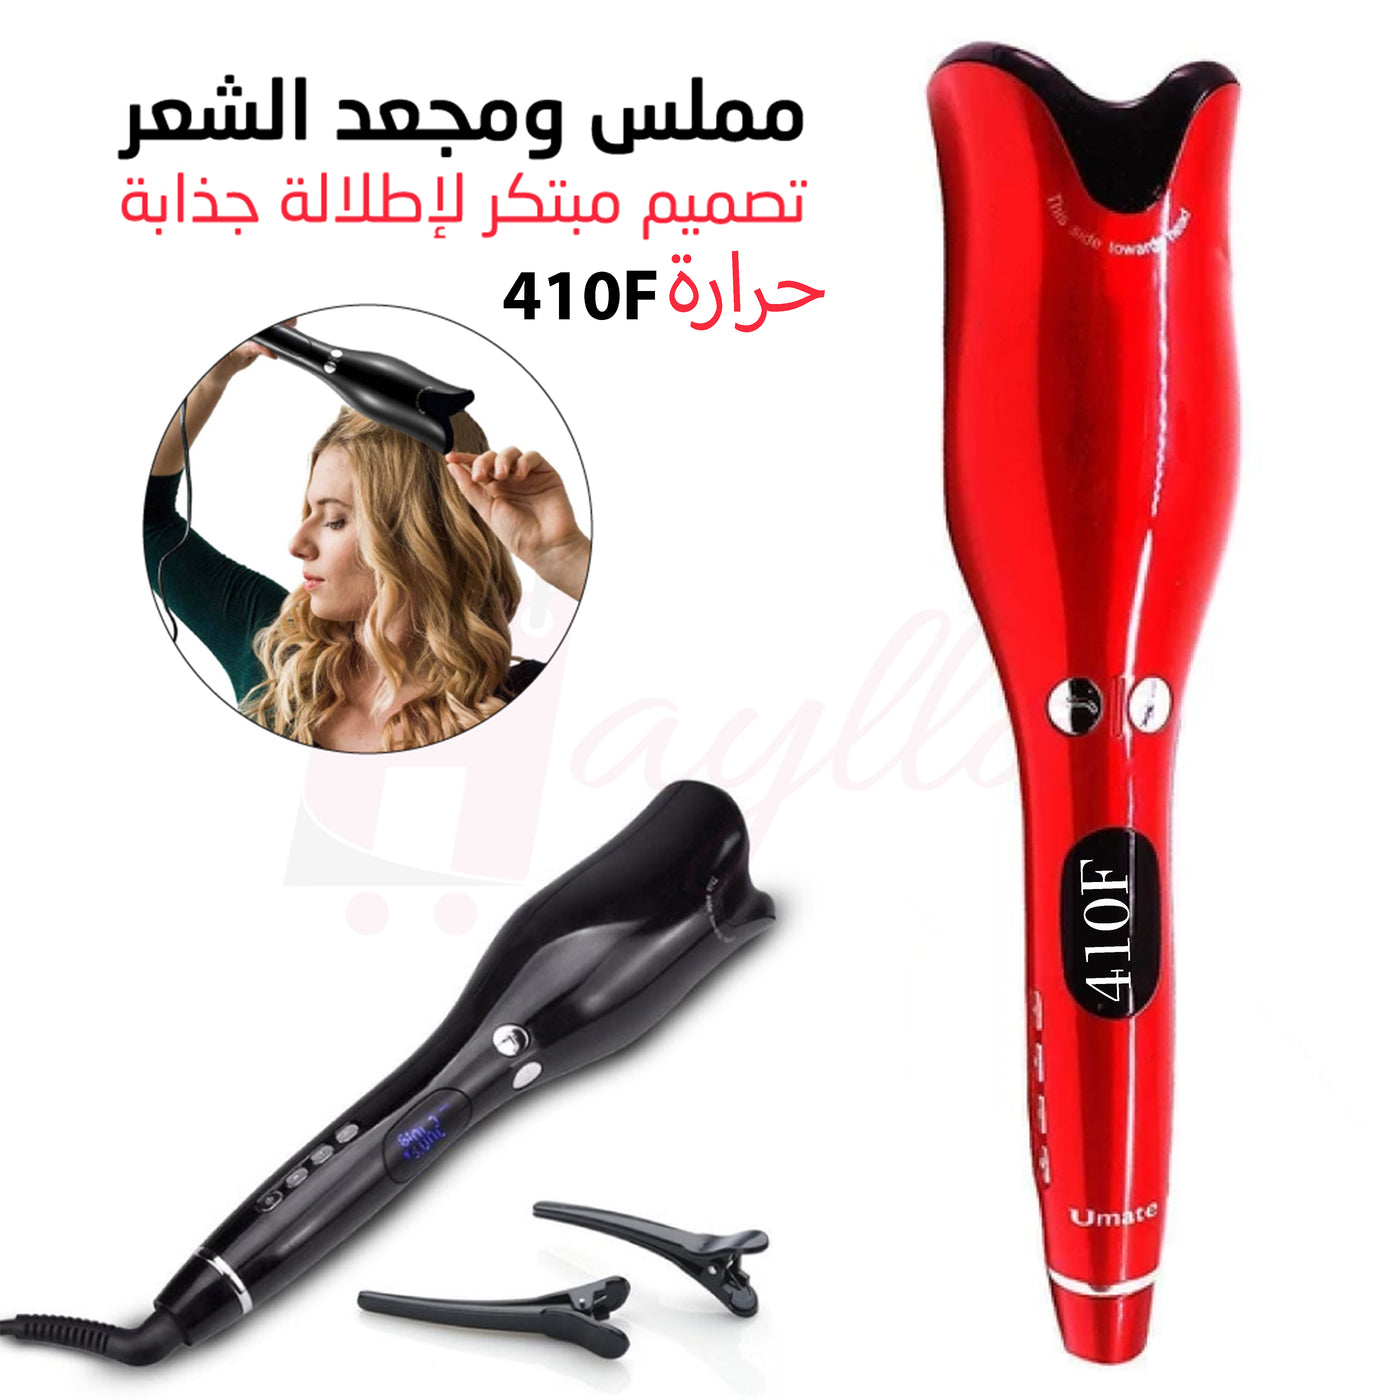 Spin And Curls Auto Hair Curler 410F